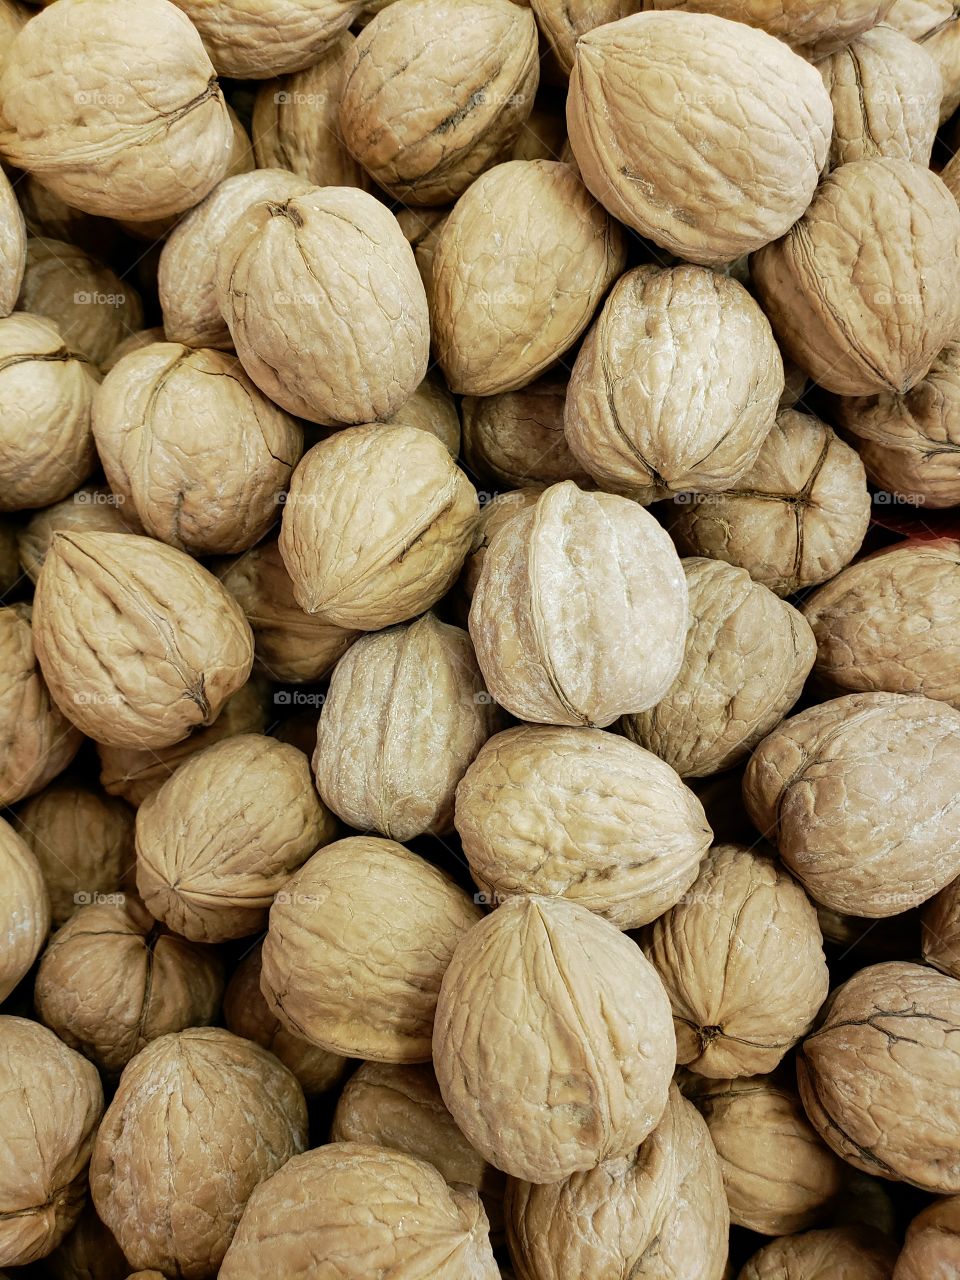 Closeup of details and texture of a pile of  walnuts in their shells at the local market